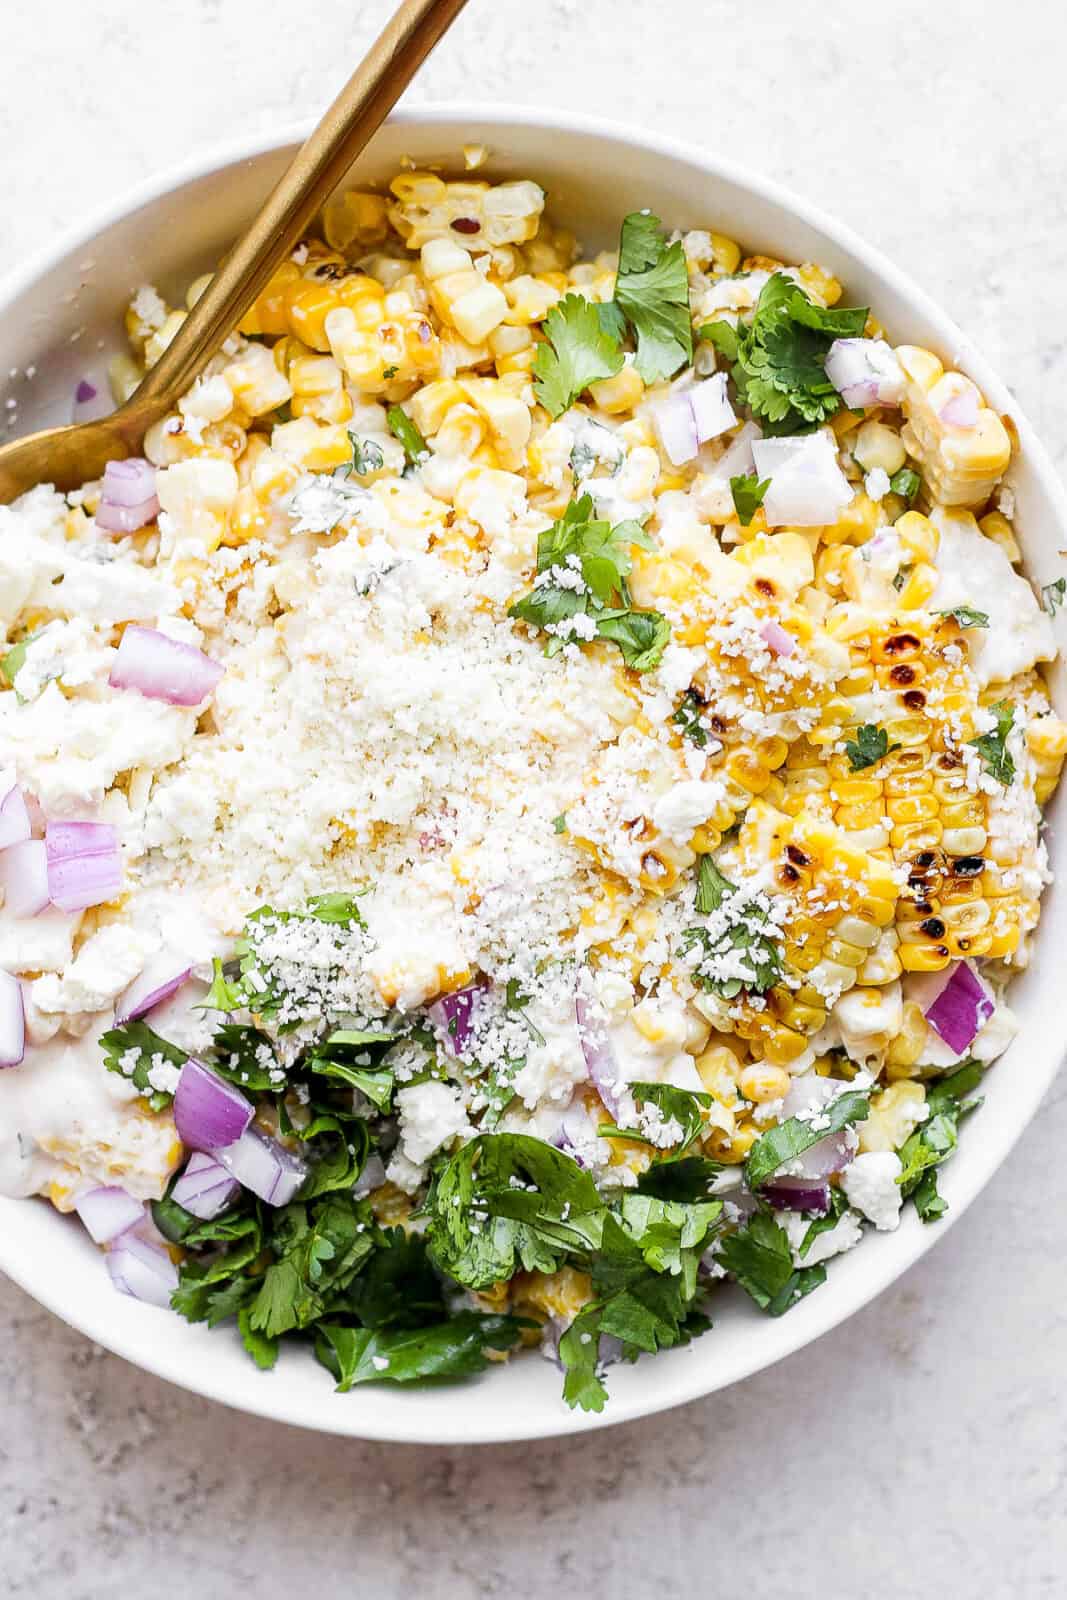 Mexican street corn salad in a bowl with spoons.